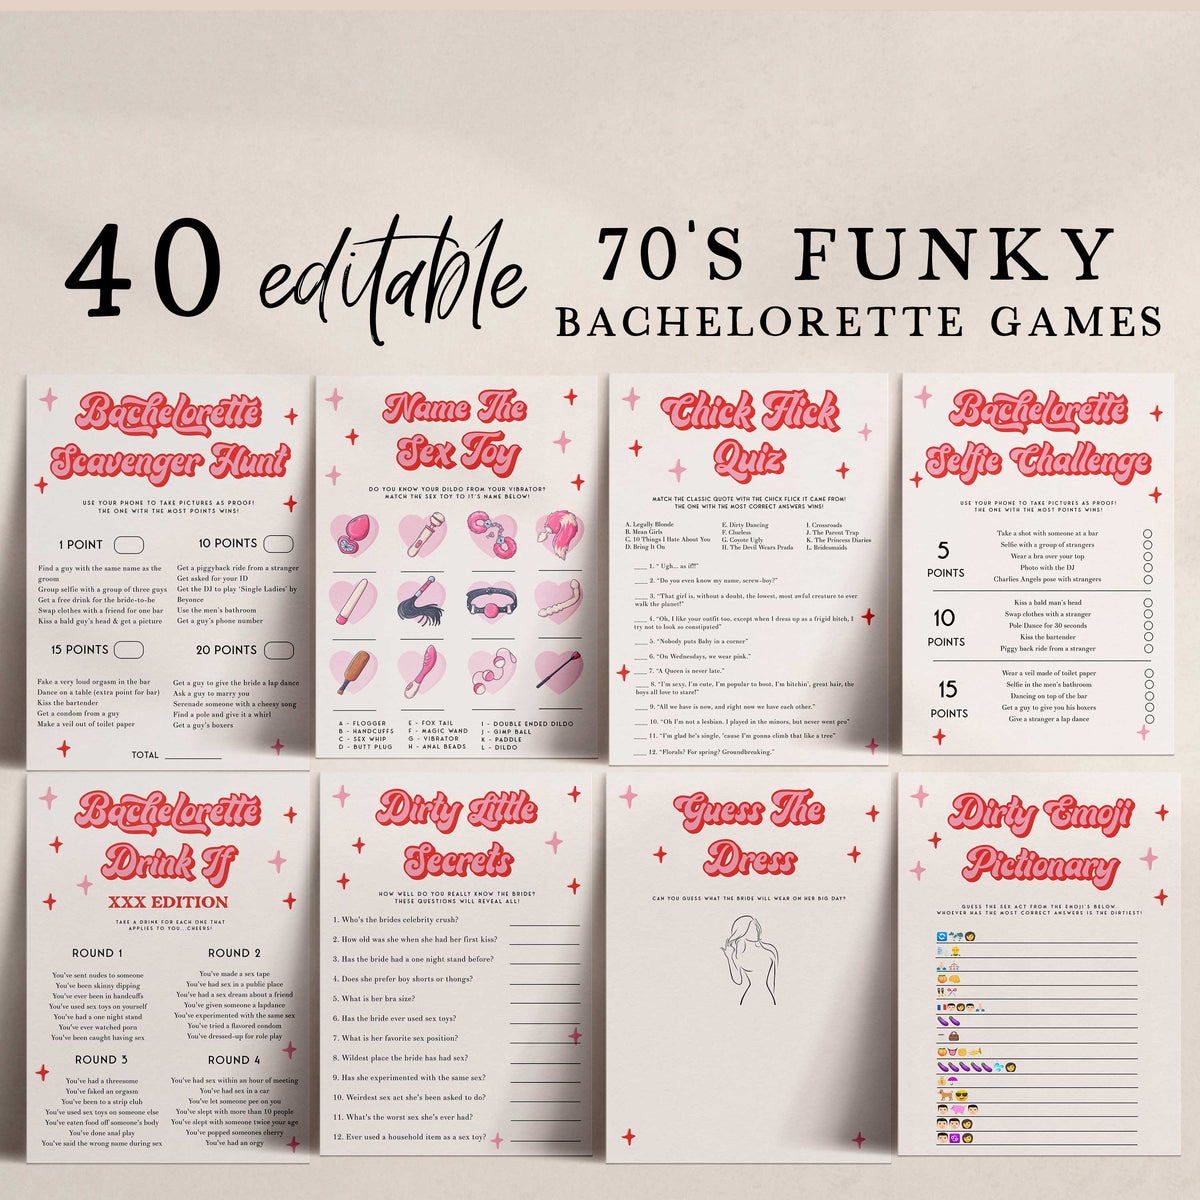 70s retro 40 editable bachelorette games including answers where applicable